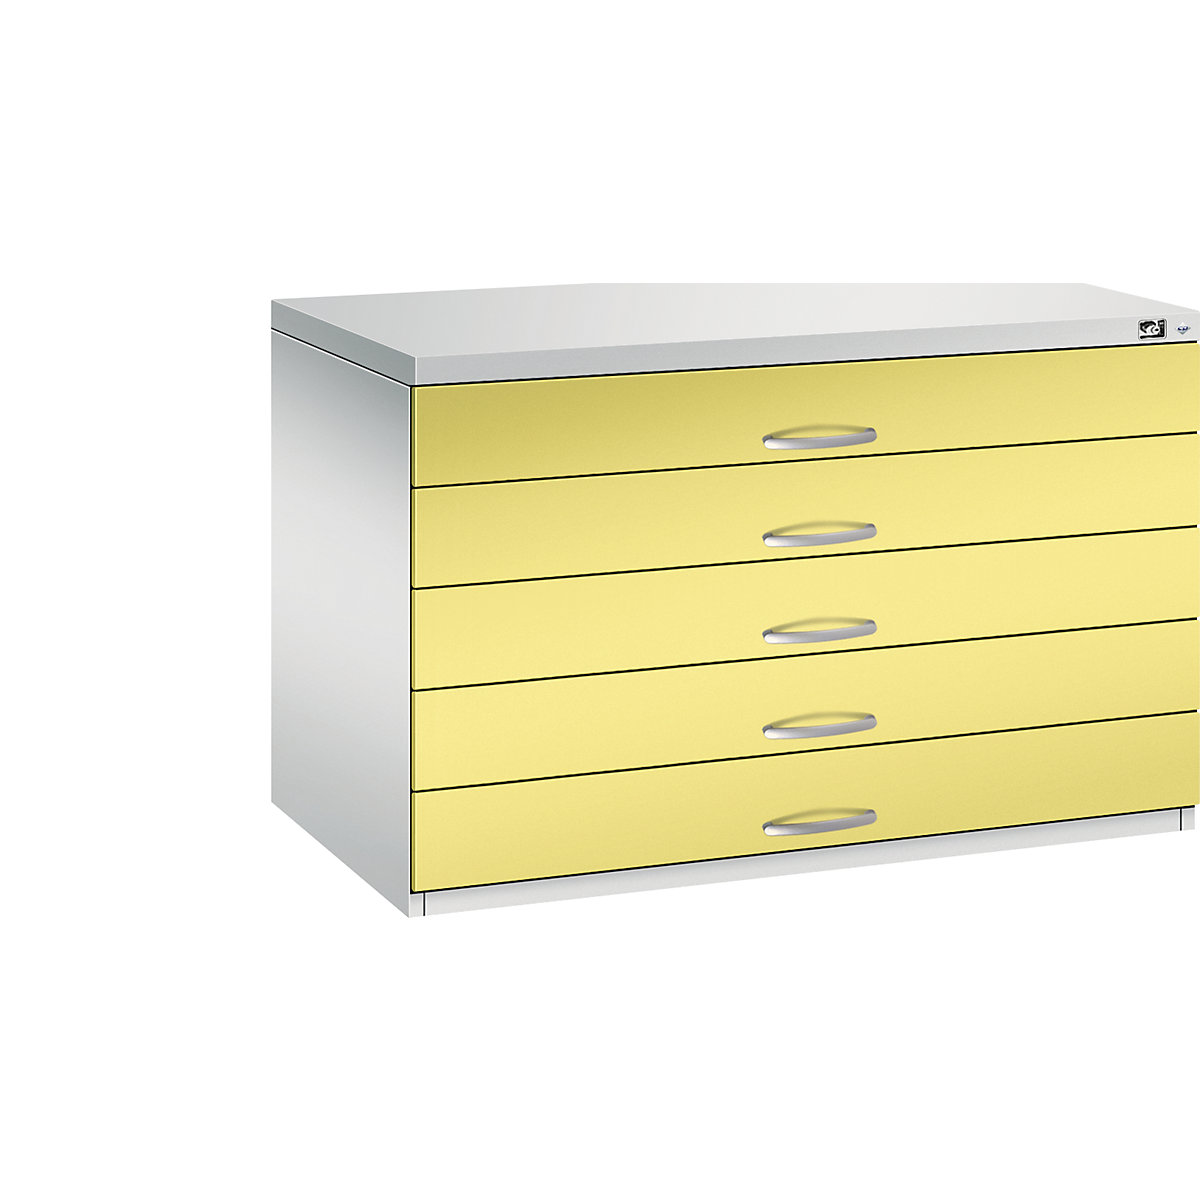 Drawing cabinet – C+P, A1, 5 drawers, height 760 mm, light grey / sulphur yellow-18